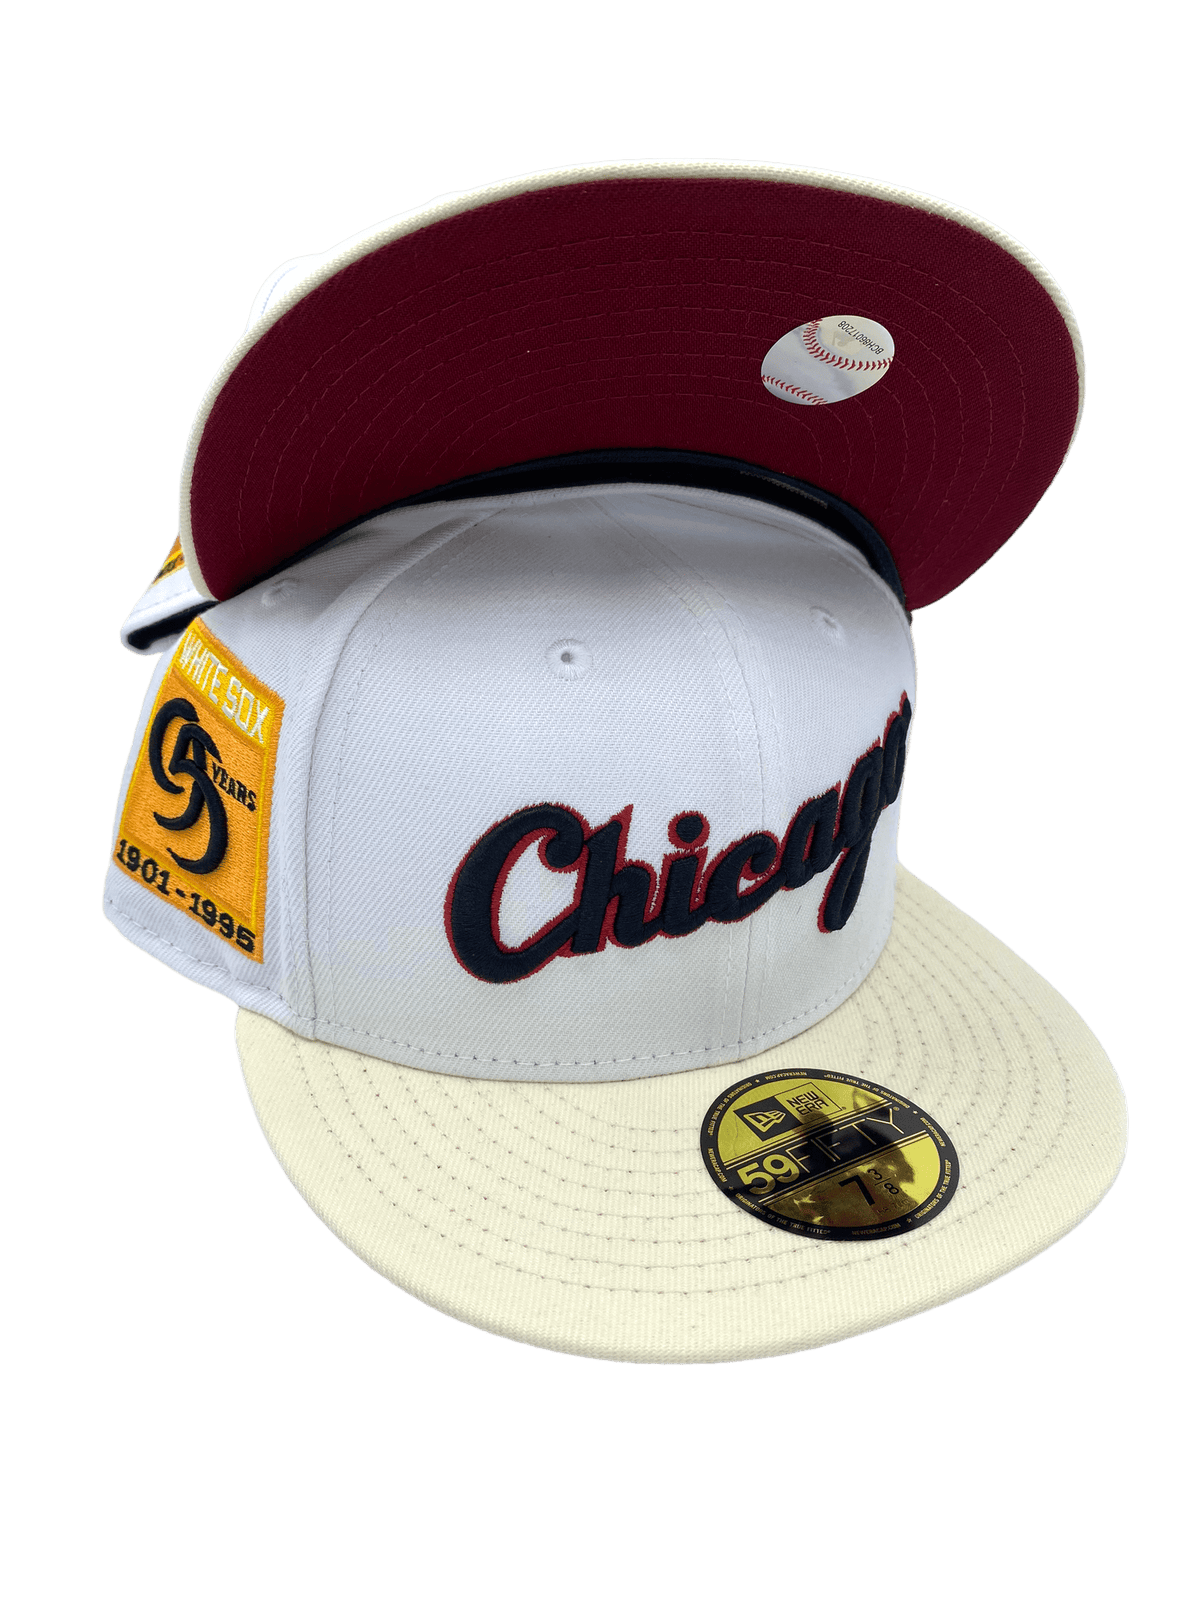 New Orleans Pelicans Milb Alternate Logo SP 59FIFTY Fitted 7